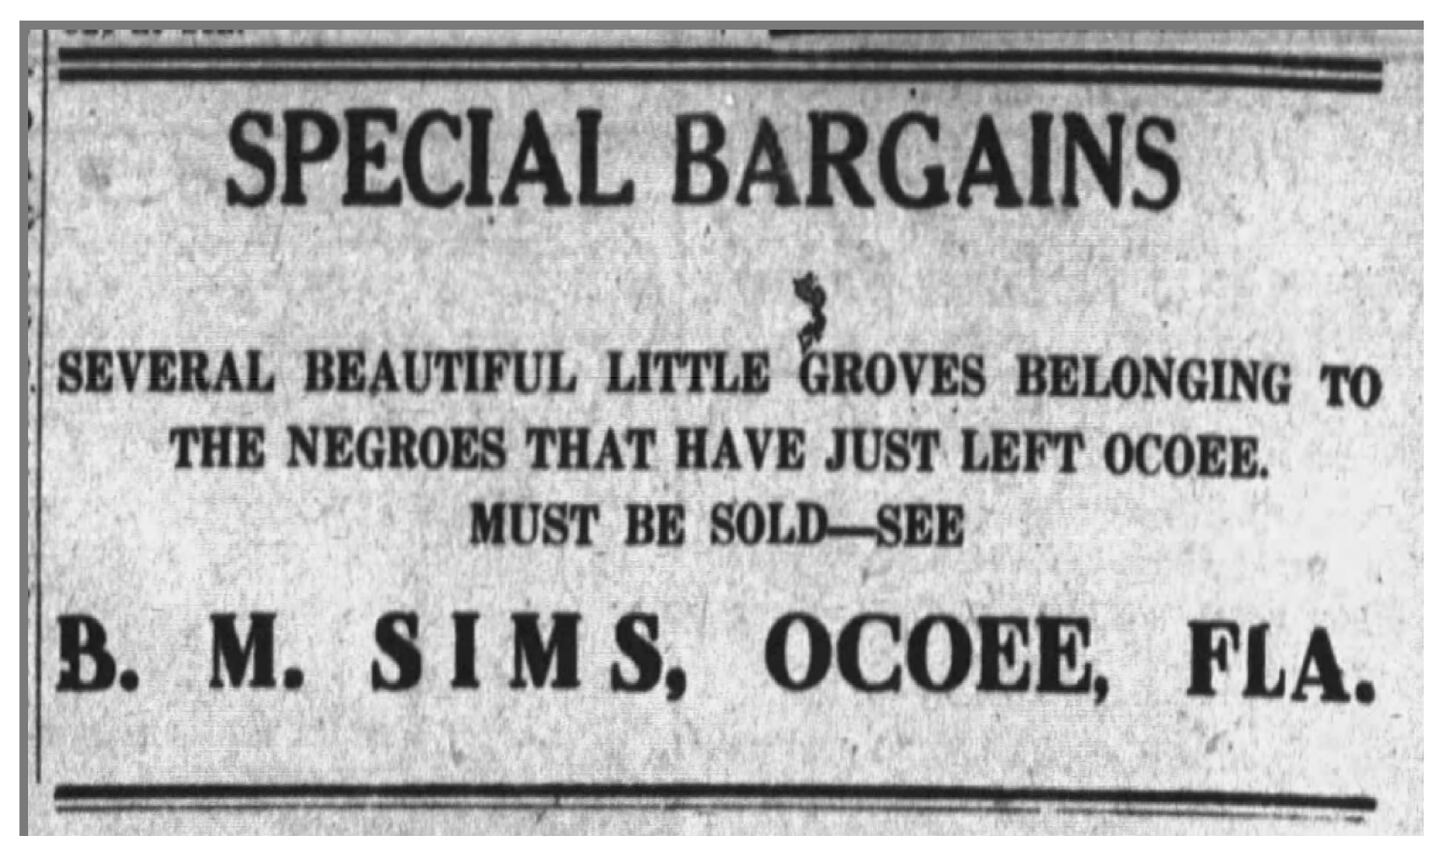 This notice appeared in a local newspaper following the Ocoee Massacre, referencing the Black landowners property put up for sale by people in the white community.